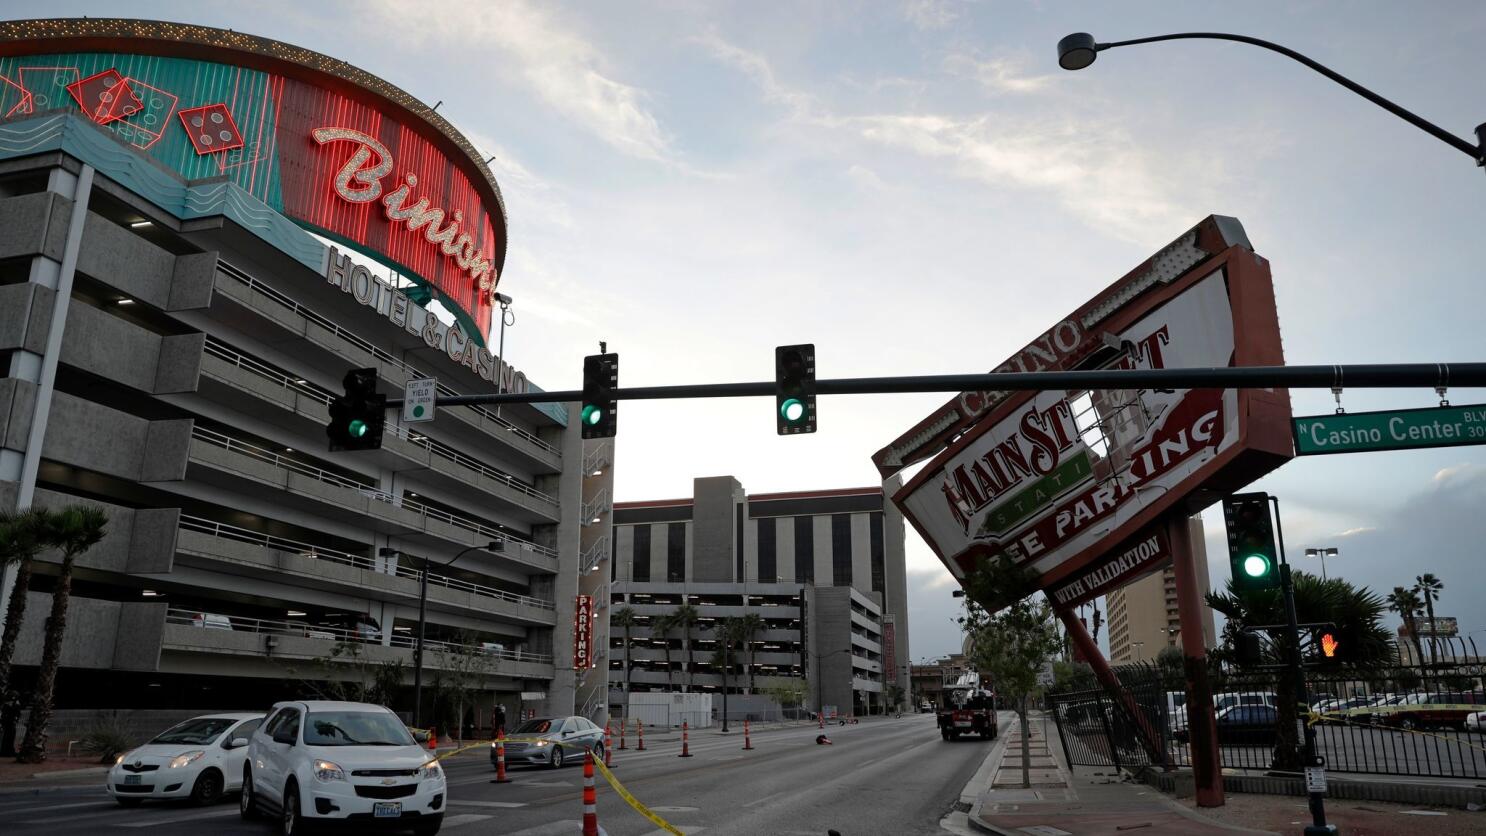 Sale of former Riviera site on Las Vegas Strip may be challenge